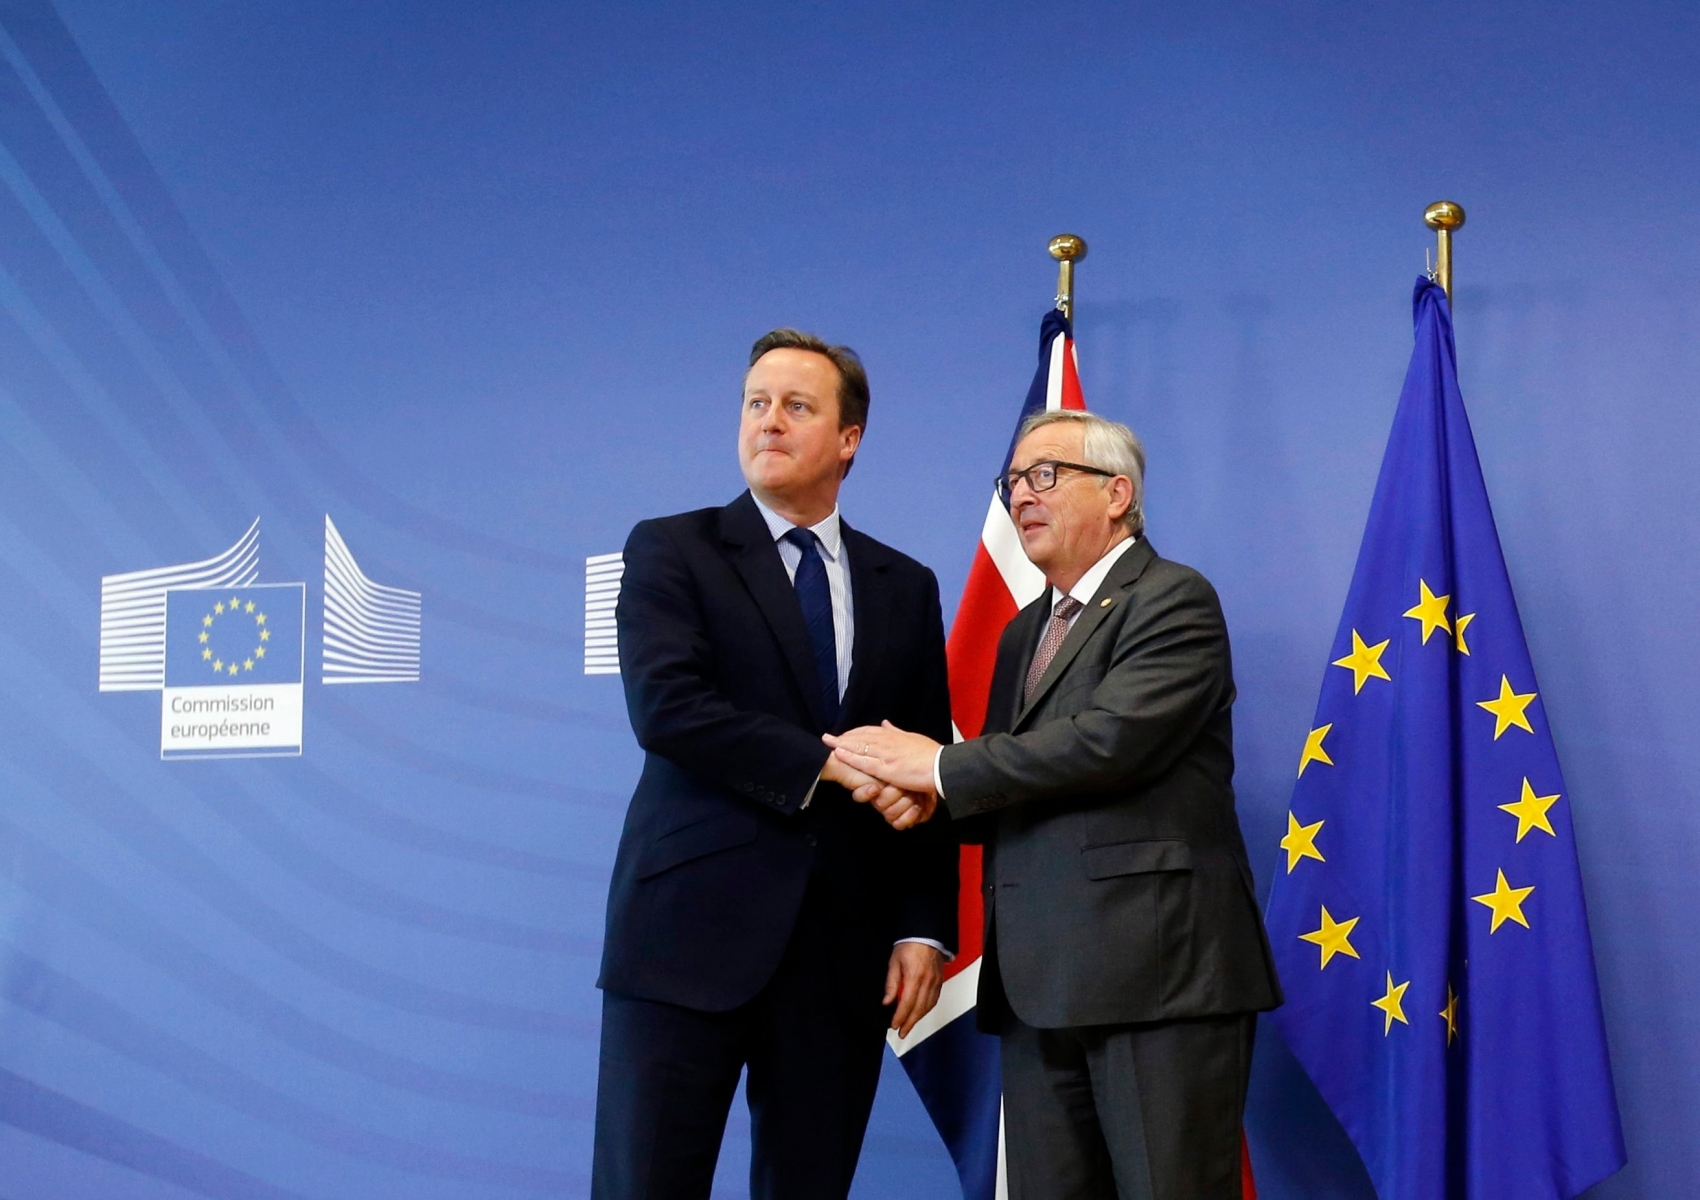 epa05395871 British Prime Minister David Cameron (L) is welcomed by European Commission President Jean-Claude Juncker (R) prior to a meeting in Brussels, Belgium, 28 June 2016. EU leaders meet in Brussels on 28 June for the first time since the British referendum, in which 51.9 percent voted to leave the European Union (EU).  EPA/OLIVIER HOSLET BRUSSELS EUROPEAN COUNCIL MEETING BRITAIN BREXIT